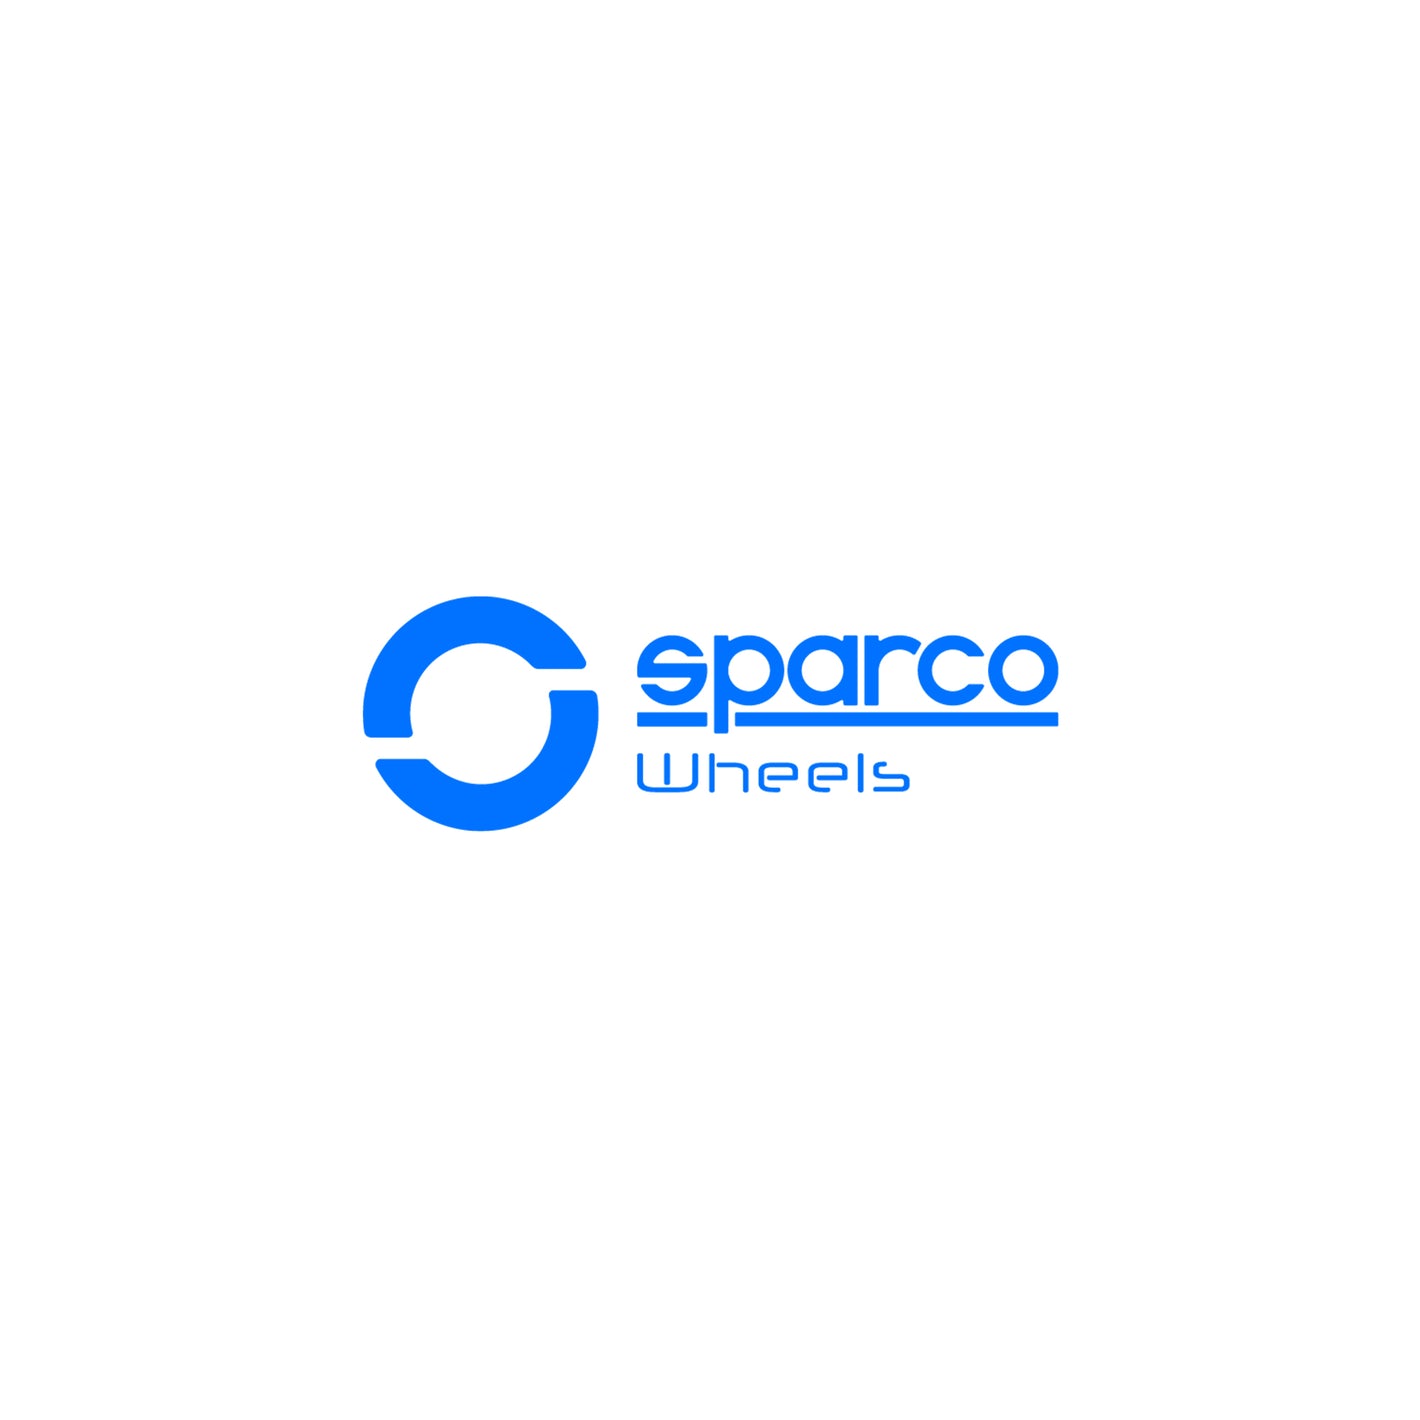 All Sparco Wheels